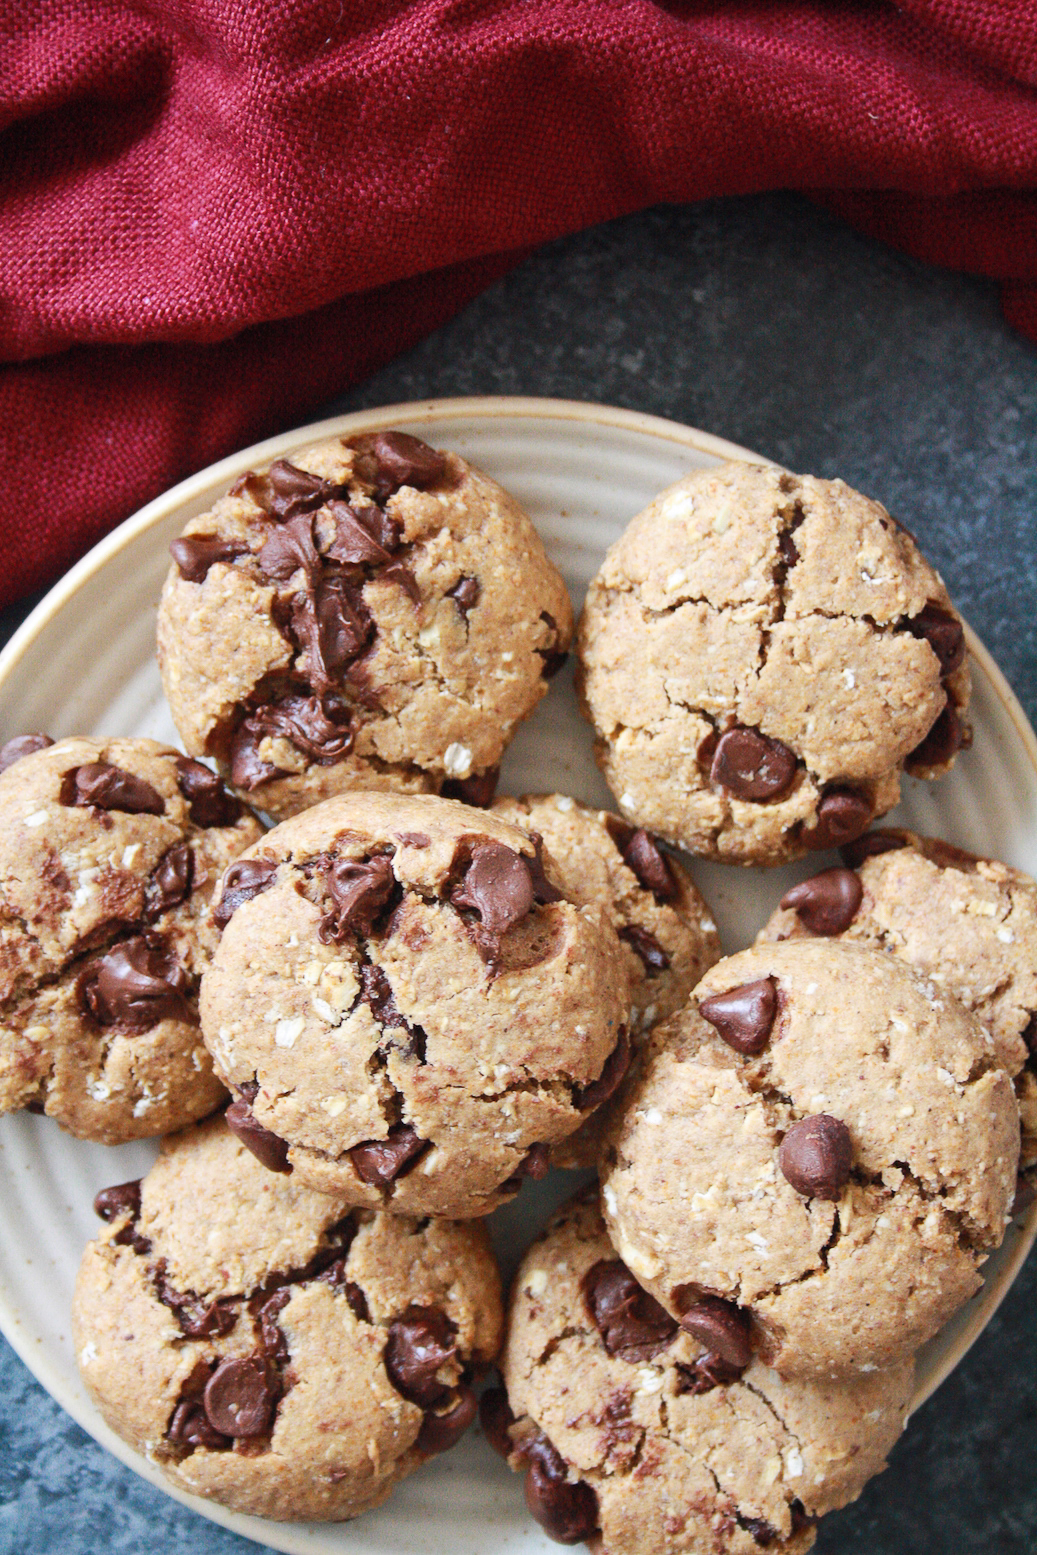 Hearty, chewy almond butter cookies made with wholewheat flour. Free of refined fat and sugar if you skip the chocolate chips!